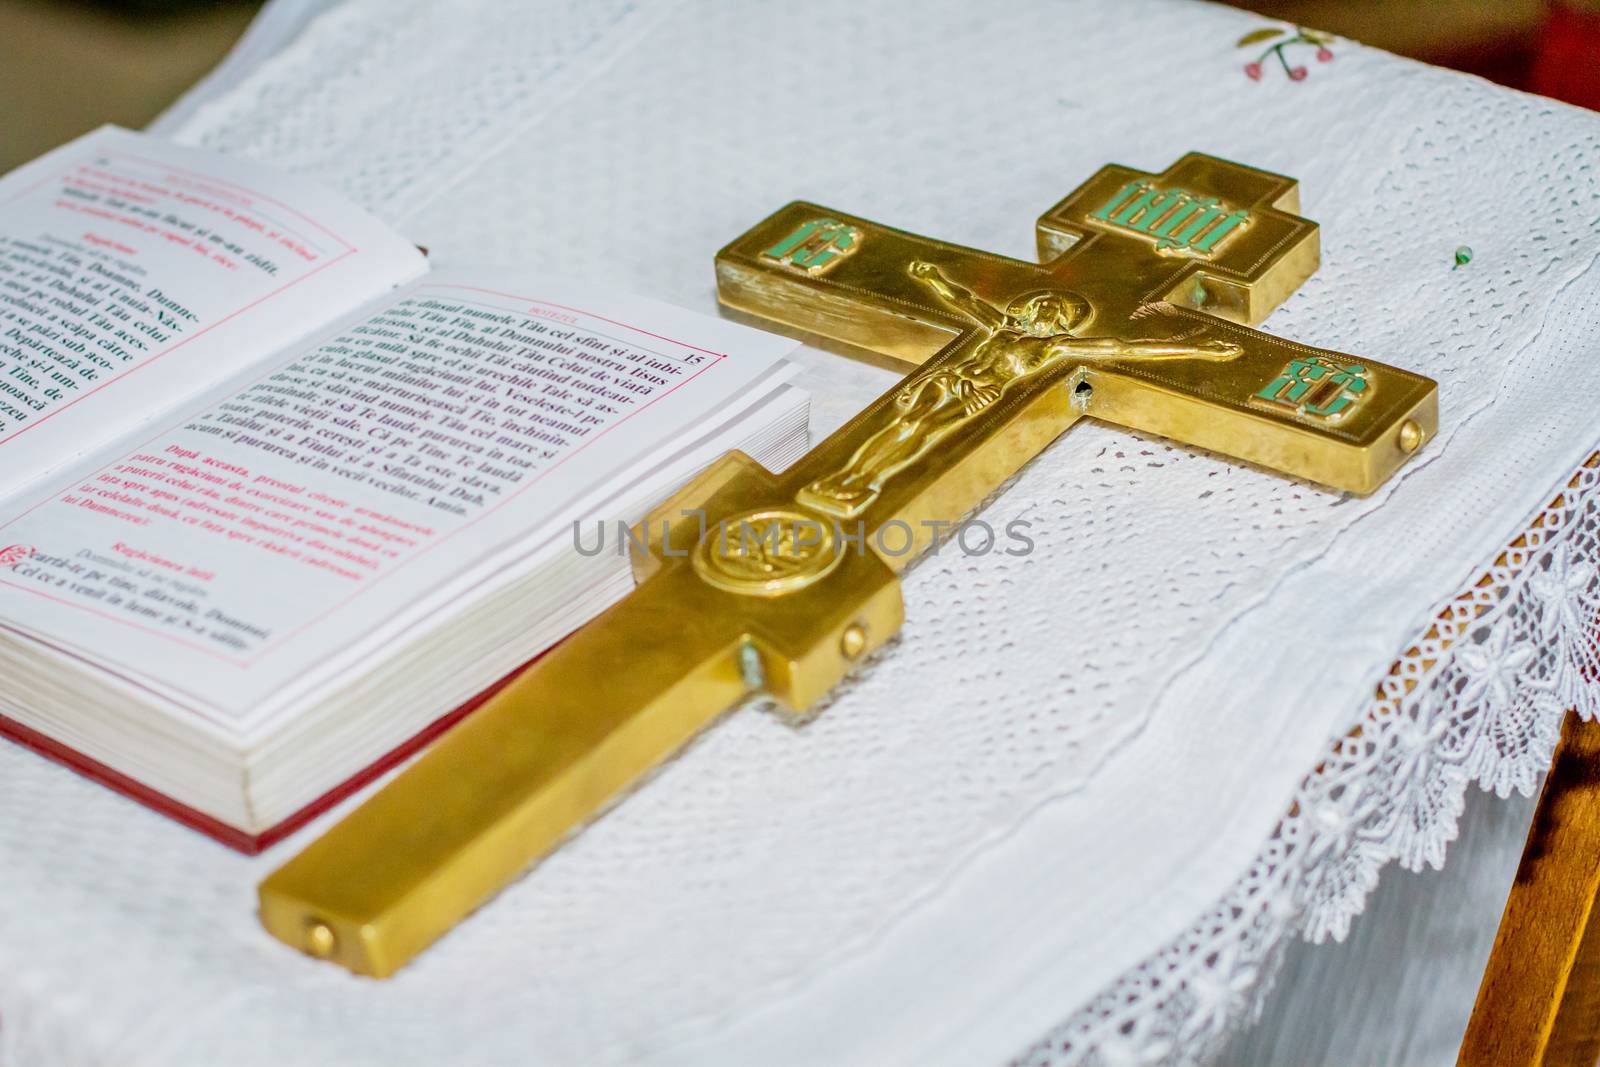 hurch utensil on an altar, cross and the Bible on table  by Angel_a